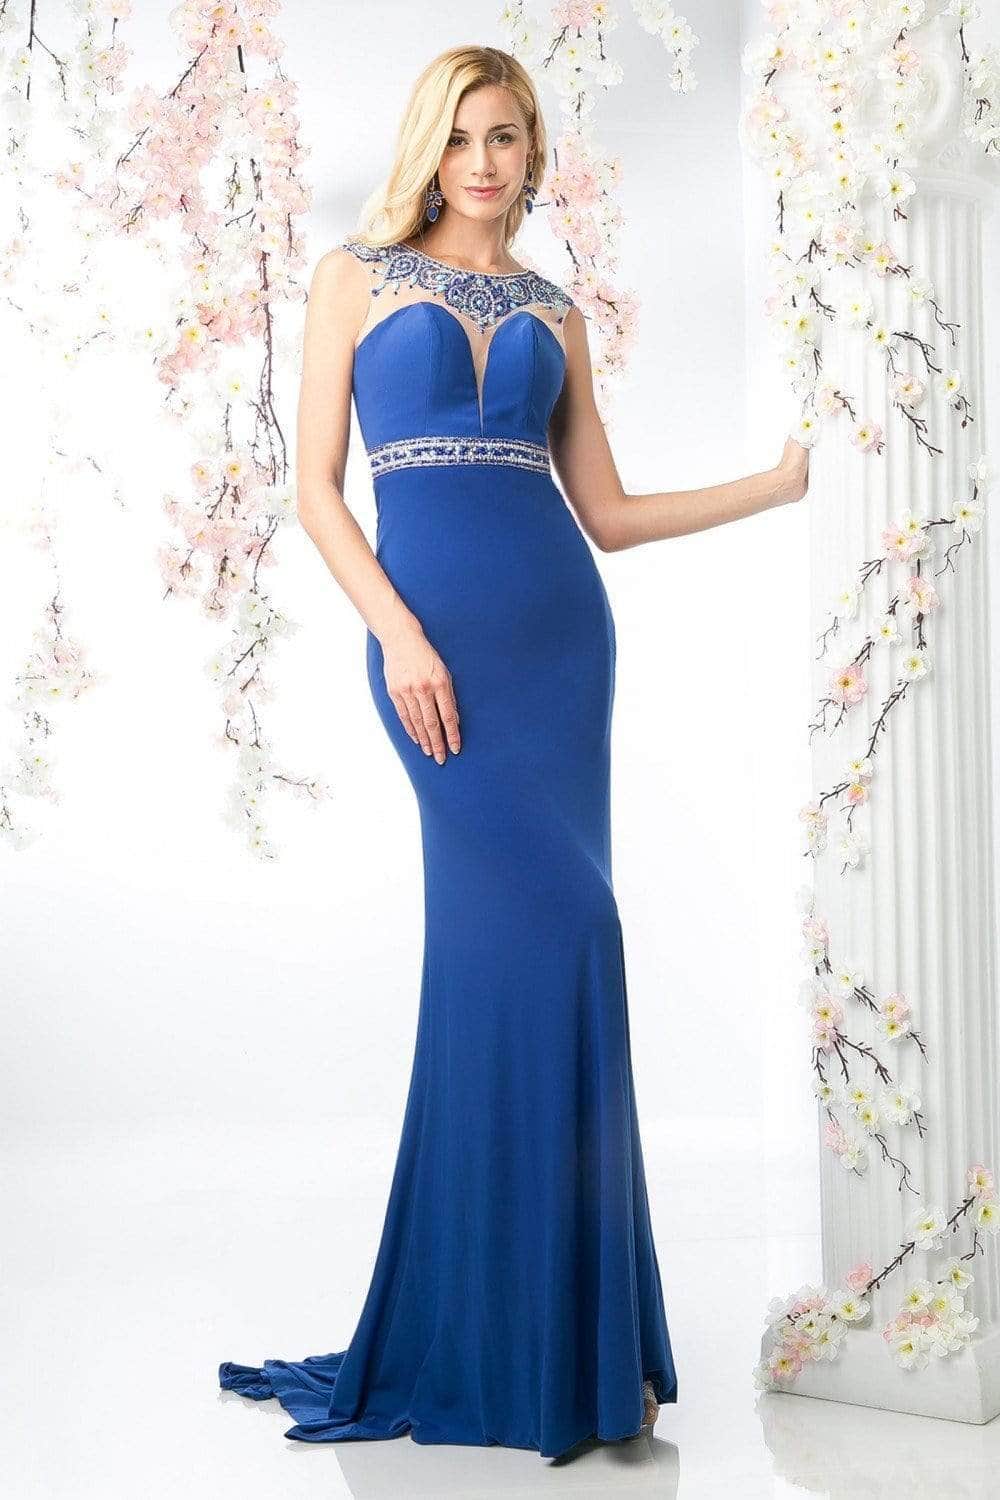 Ladivine 8746 Special Occasion Dress 2 / Royal